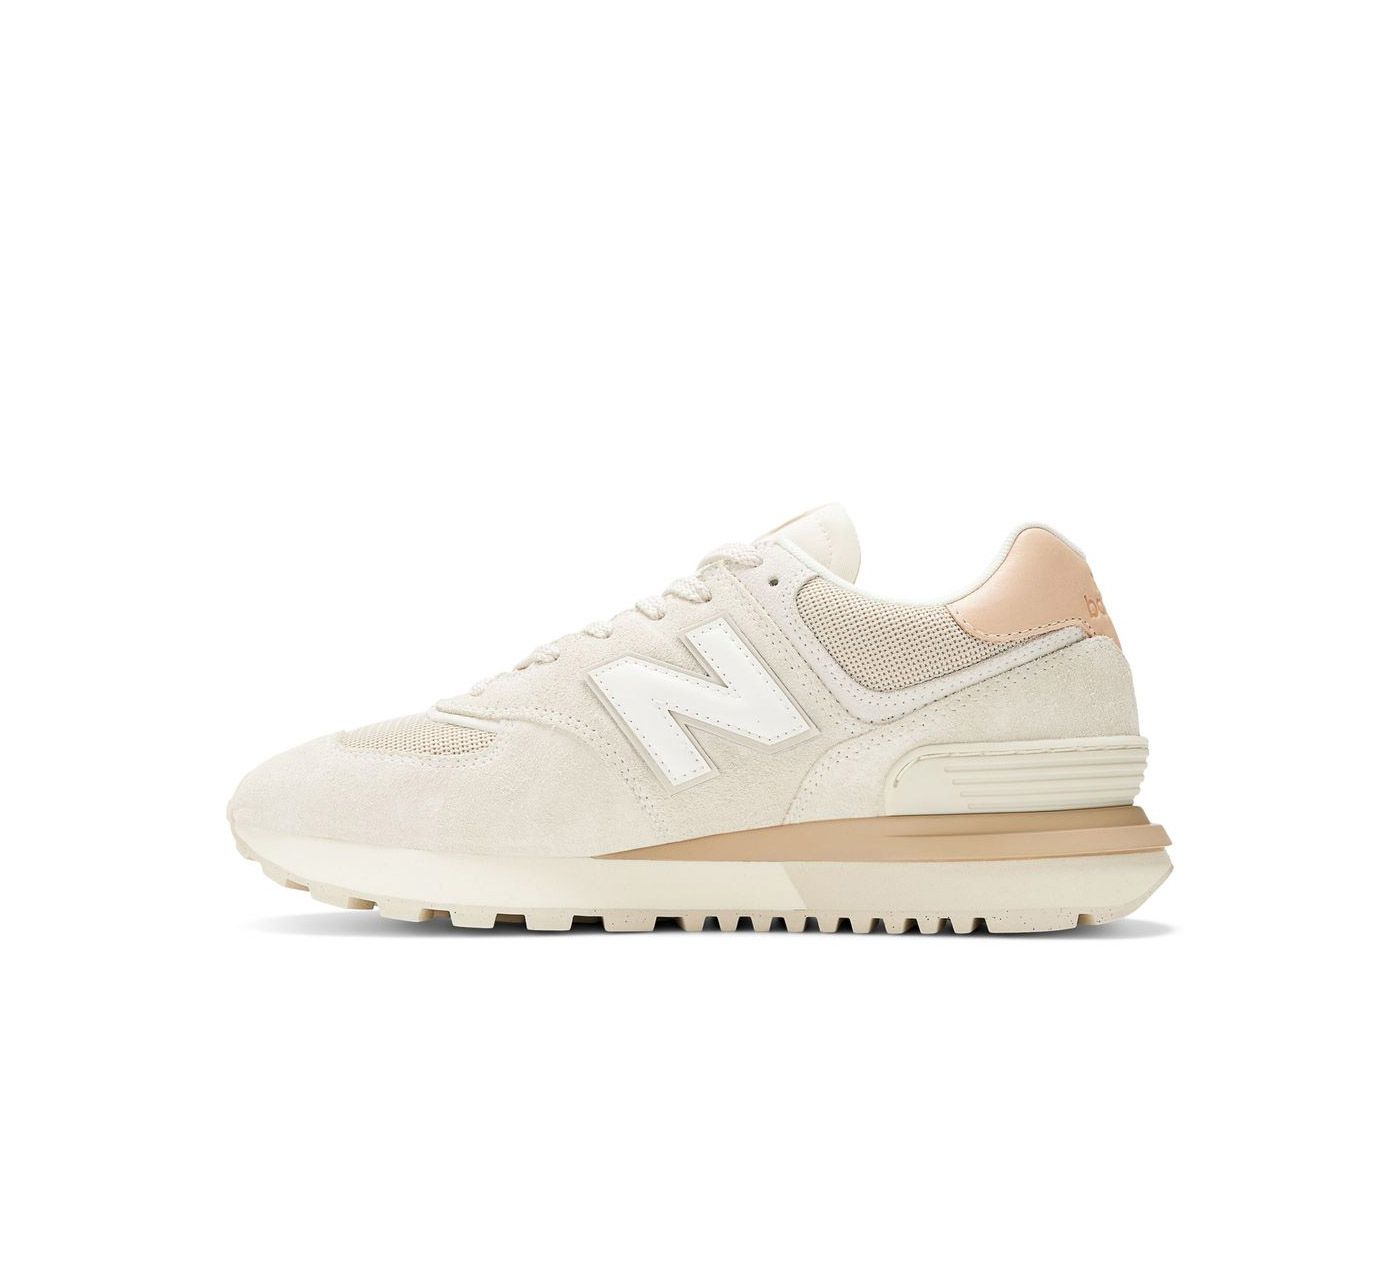 New Balance 574 trainers in white